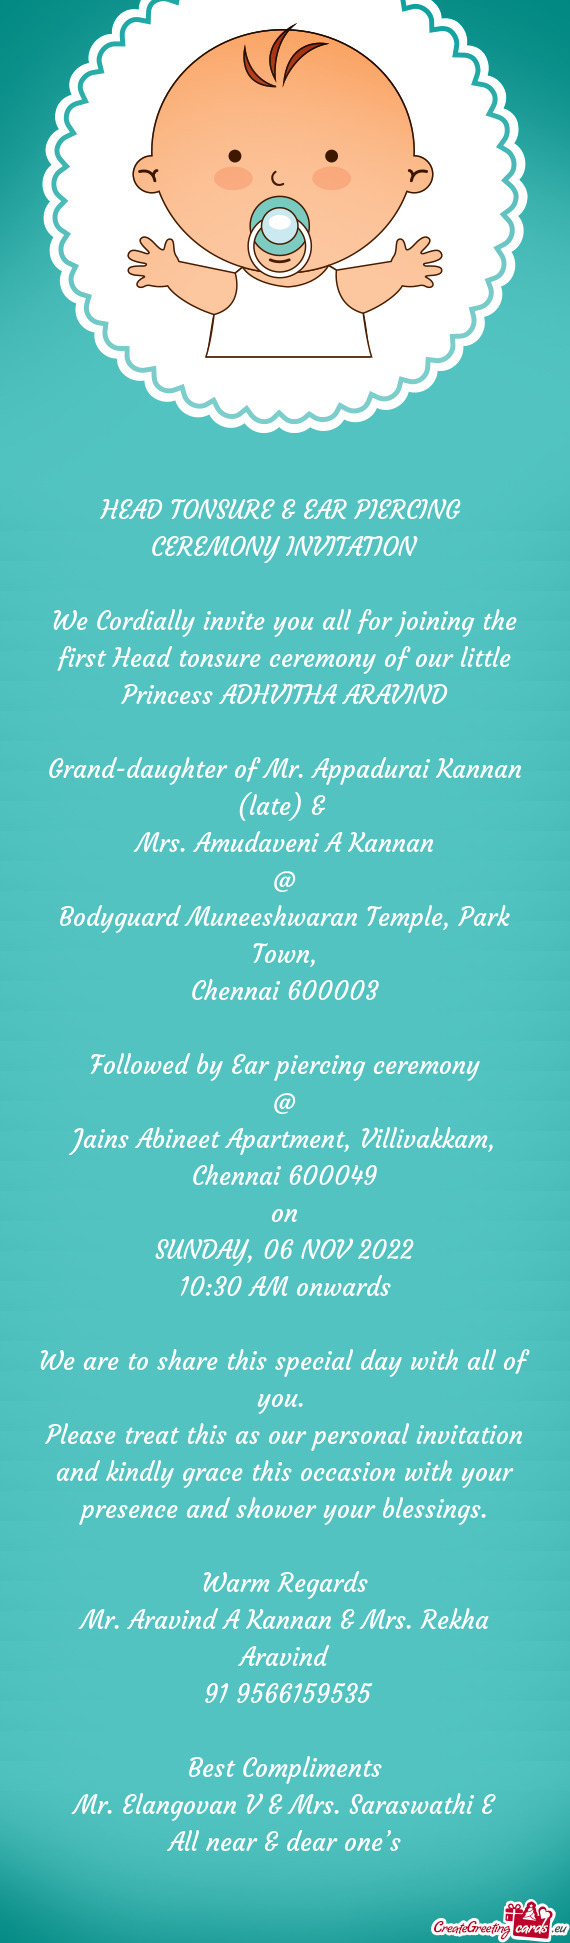 We Cordially invite you all for joining the first Head tonsure ceremony of our little Princess ADHVI